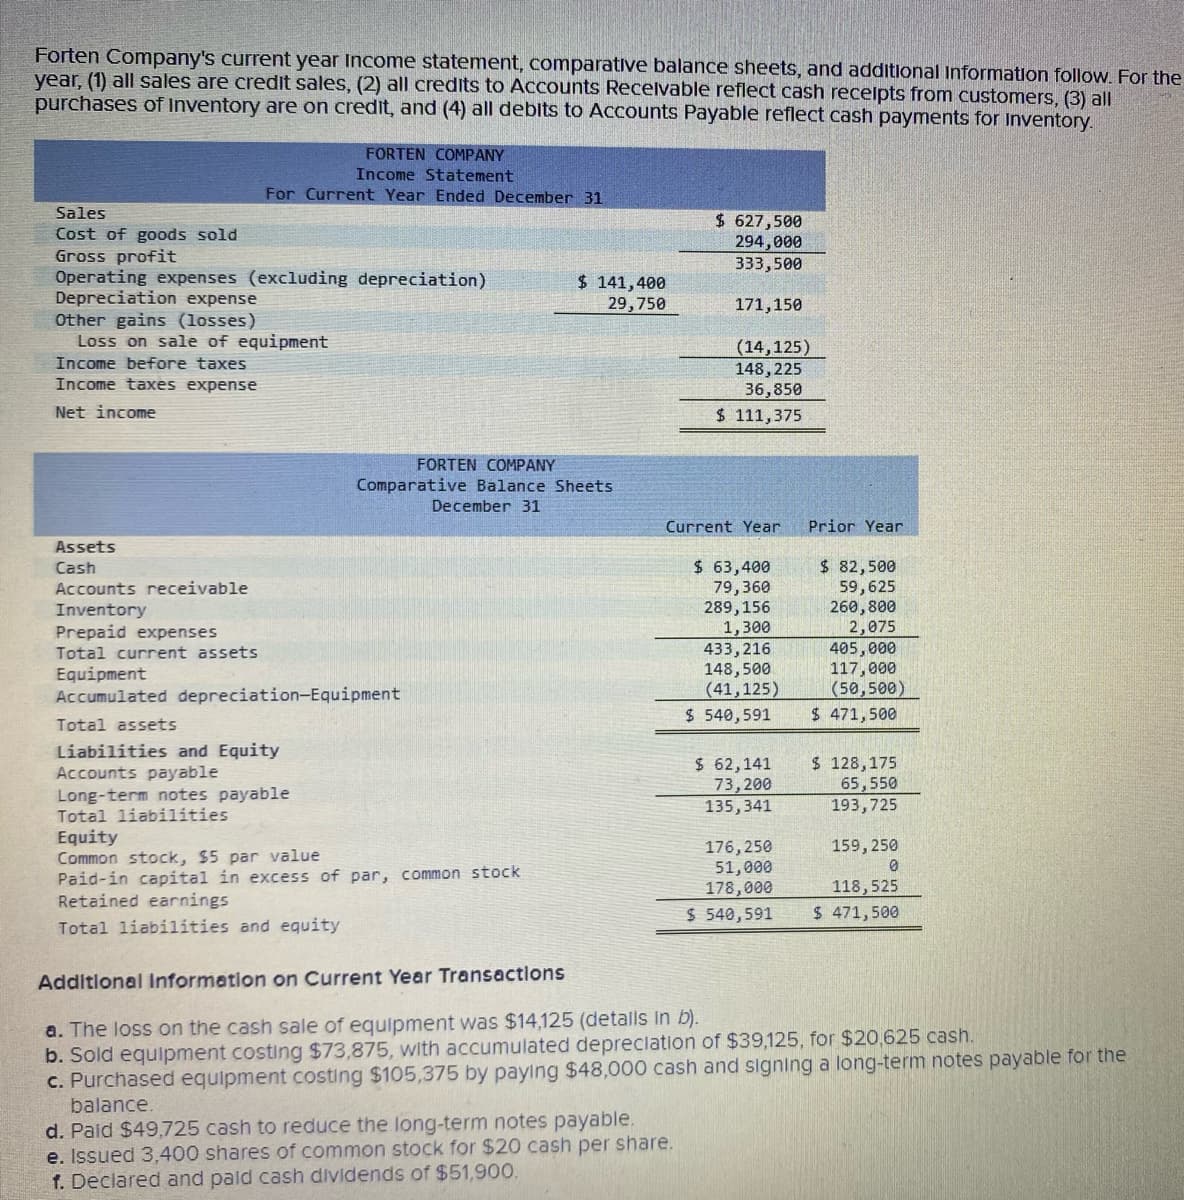 Forten Company's current year Income statement, comparative balance sheets, and additional Information follow. For the
year, (1) all sales are credit sales, (2) all credits to Accounts Receivable reflect cash receipts from customers, (3) all
purchases of Inventory are on credit, and (4) all debits to Accounts Payable reflect cash payments for Inventory.
Sales
Cost of goods sold
Gross profit
Operating expenses (excluding depreciation)
Depreciation expense
Other gains (losses)
Loss on sale of equipment
Income before taxes
Income taxes expense
Net income
Assets
Cash
Accounts receivable
Inventory
Prepaid expenses
Total current assets
FORTEN COMPANY
Income Statement
For Current Year Ended December 31
Total assets
Equipment
Accumulated depreciation-Equipment
Liabilities and Equity
Accounts payable
Long-term notes payable
Total liabilities
FORTEN COMPANY
Comparative Balance Sheets
December 31
$ 141,400
29,750
Equity
Common stock, $5 par value
Paid-in capital in excess of par, common stock
Retained earnings
Total liabilities and equity
$ 627,500
294,000
333,500
171,150
d. Paid $49,725 cash to reduce the long-term notes payable.
e. Issued 3,400 shares of common stock for $20 cash per share.
1. Declared and paid cash dividends of $51,900.
(14,125)
148, 225
36,850
$ 111,375
Current Year
$ 63,400
79,360
289,156
1,300
433,216
148,500
(41,125)
$540,591
$ 62,141
73,200
135,341
Prior Year
$ 82,500
59,625
260,800
2,075
405,000
117,000
(50,500)
$ 471,500
$ 128,175
65,550
193,725
176,250
51,000
178,000
118,525
$ 540,591 $ 471,500
159, 250
0
Additional Information on Current Year Transactions
a. The loss on the cash sale of equipment was $14,125 (details in b).
b. Sold equipment costing $73,875, with accumulated depreciation of $39,125, for $20,625 cash.
c. Purchased equipment costing $105,375 by paying $48,000 cash and signing a long-term notes payable for the
balance.